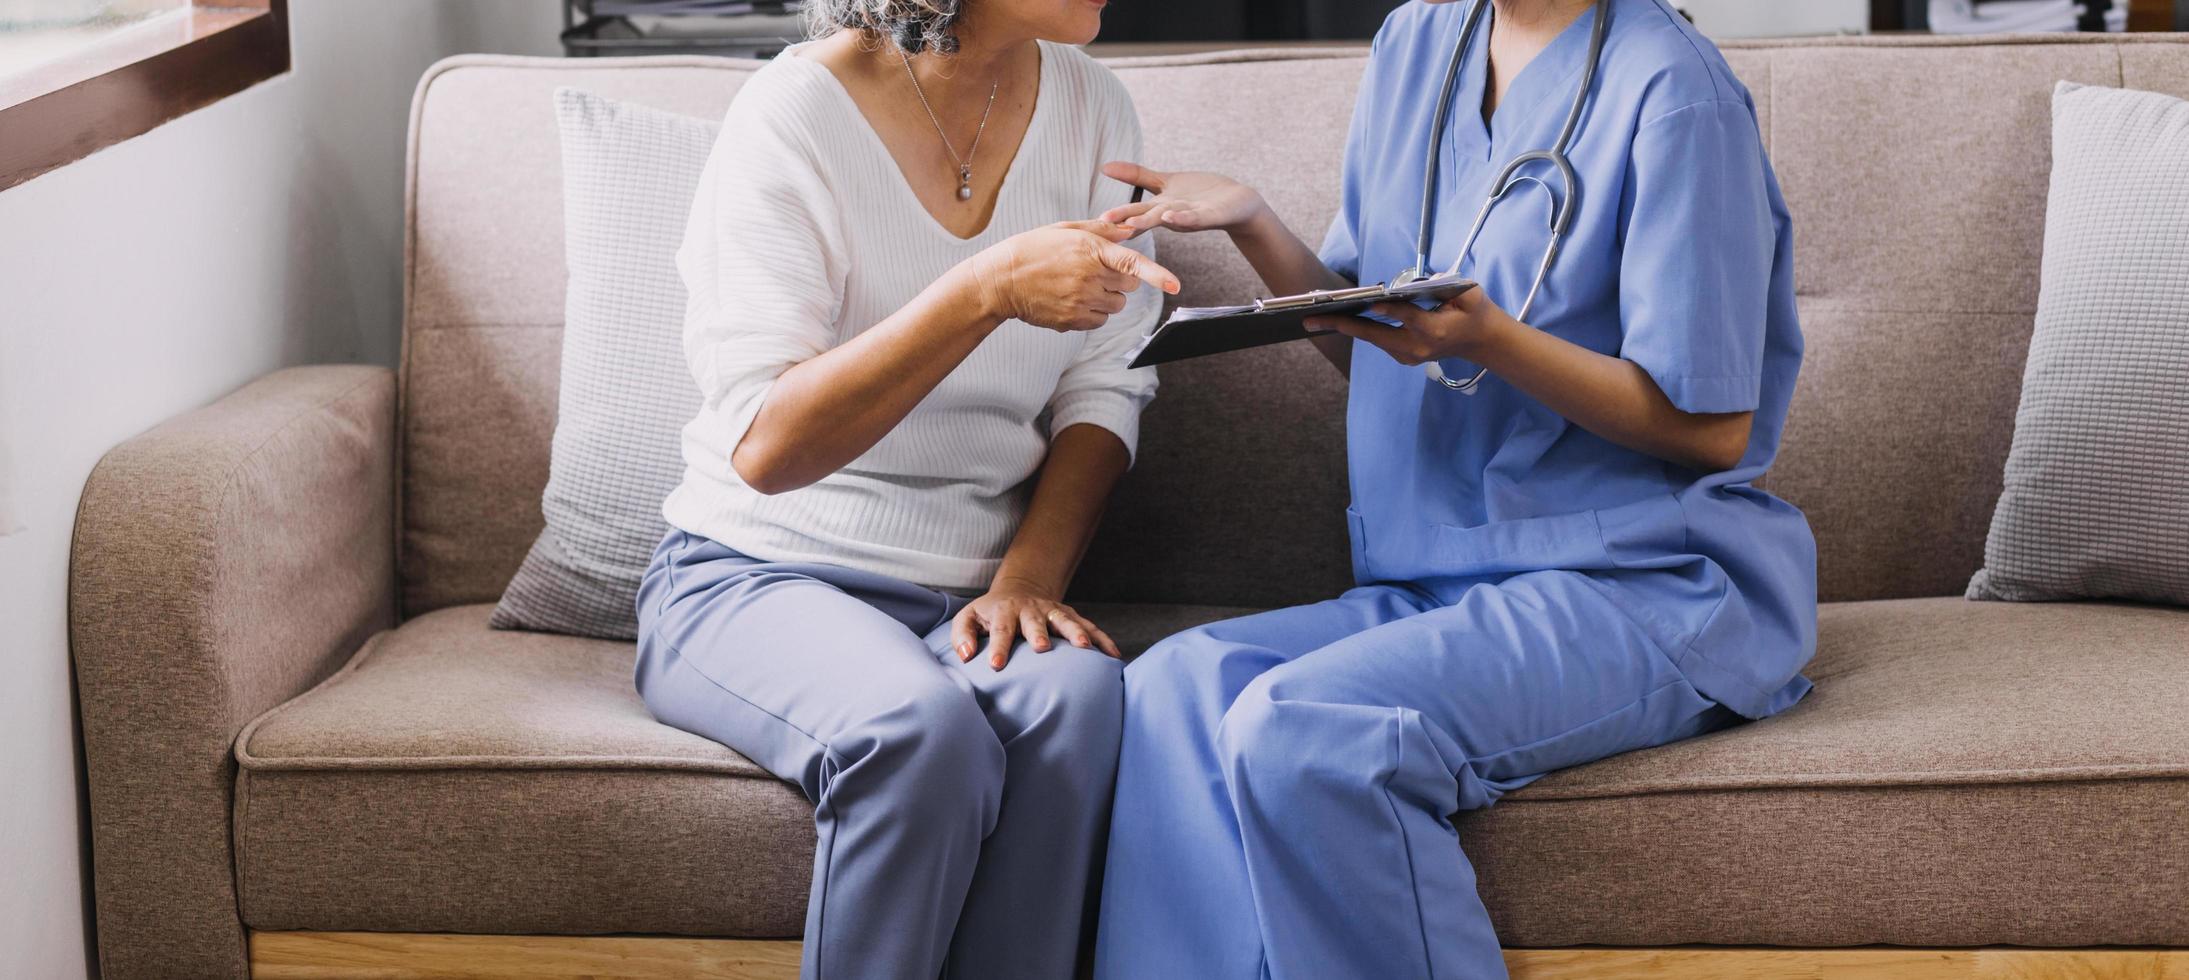 Homecare nursing service and elderly people cardiology healthcare. Close up of young hispanic female doctor nurse check mature caucasian man patient heartbeat using stethoscope during visit photo